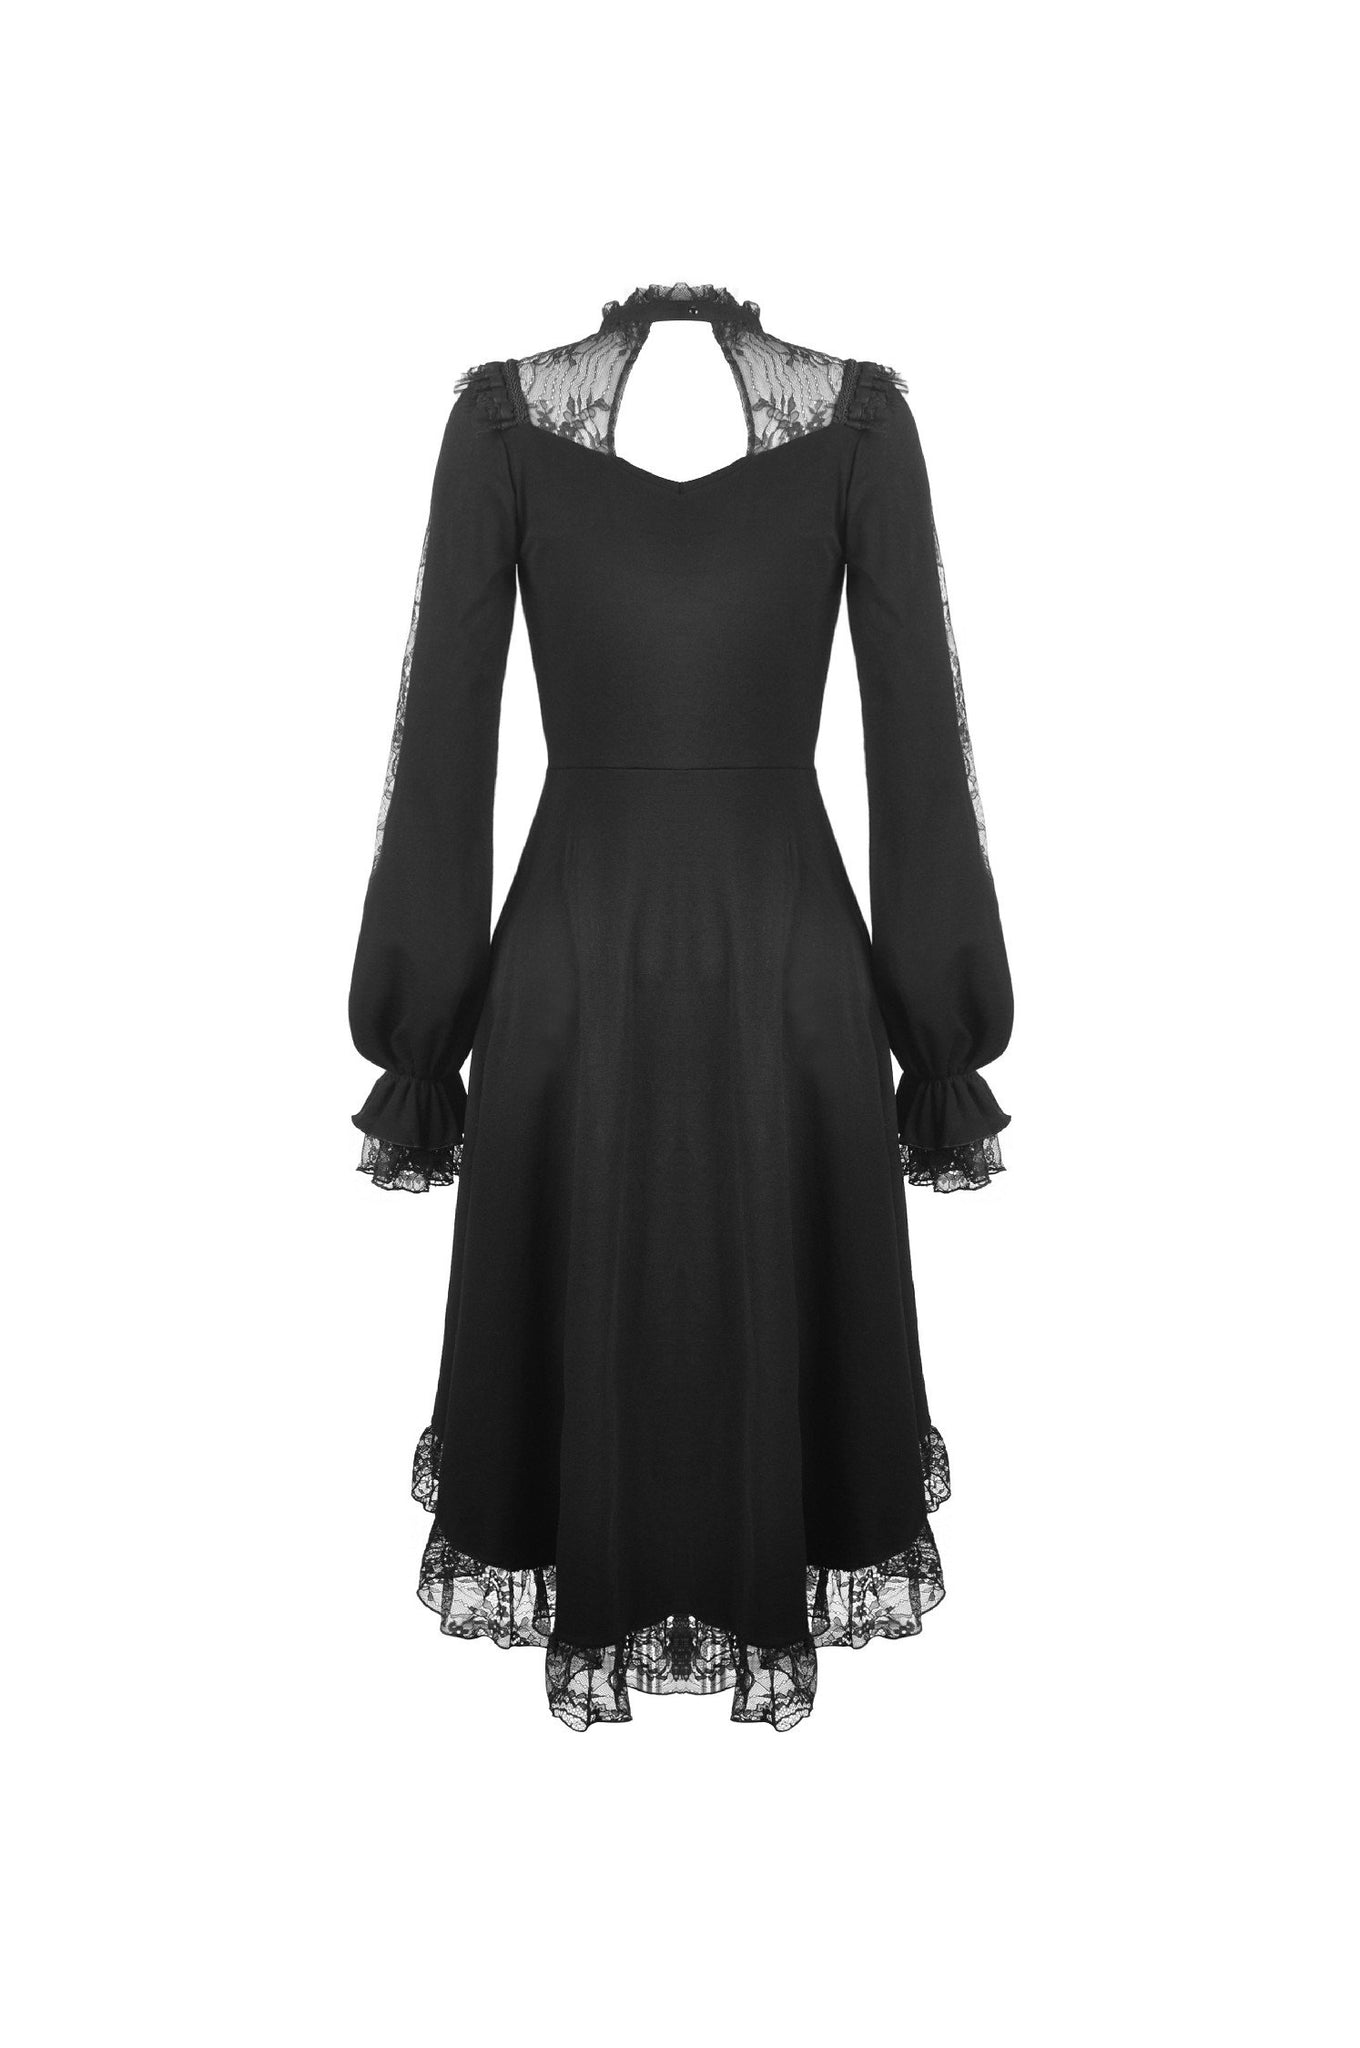 Lace lace up longsleeves cocktail gothic dress DW436 – DARK IN LOVE